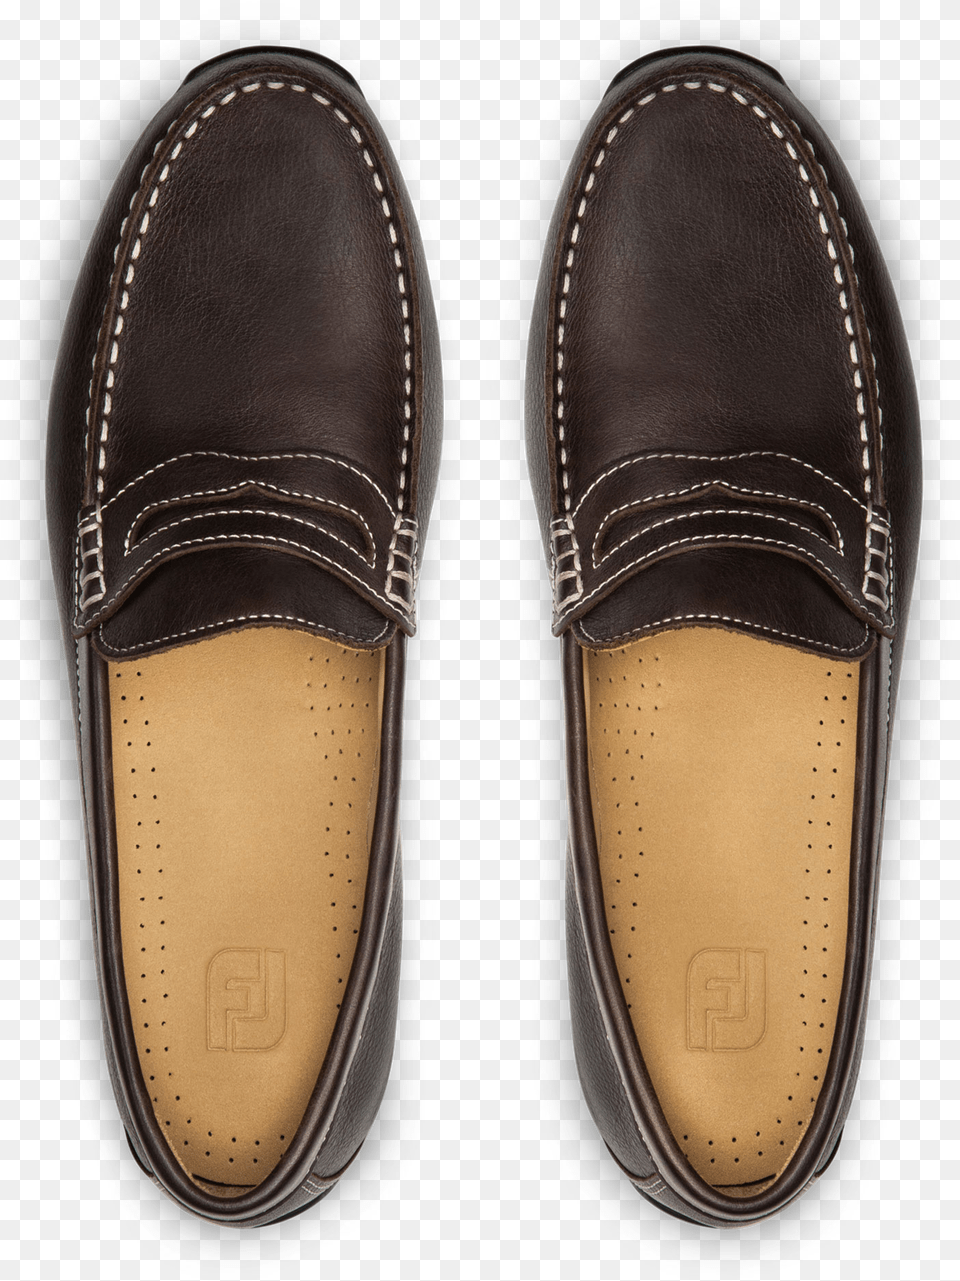 Club Casuals Penny Loafer Round Toe, Clothing, Footwear, Shoe, Sneaker Png Image